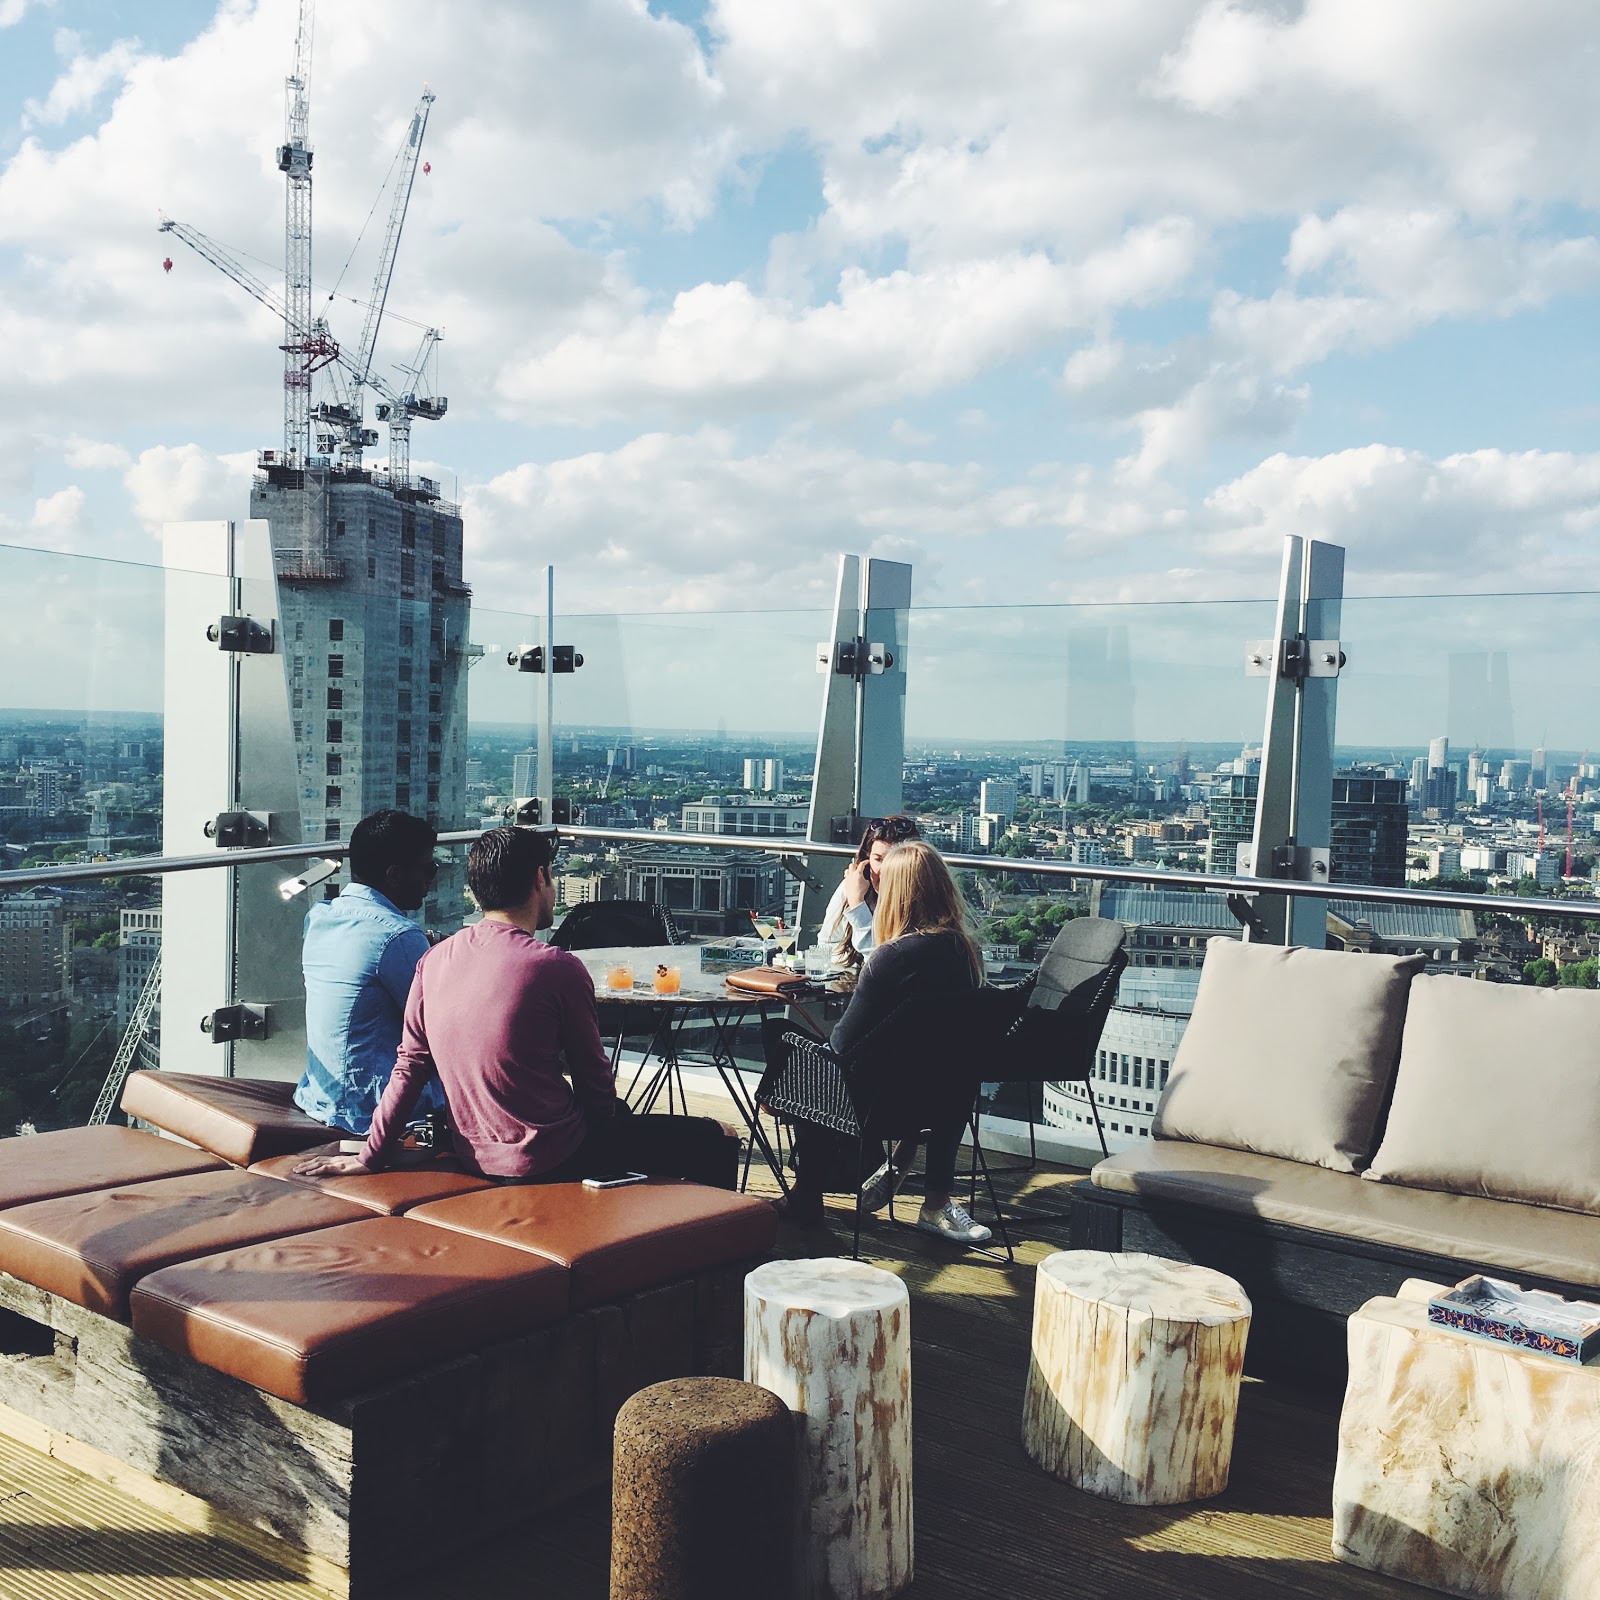 Stella's Wardrobe: NOVOTEL CANARY WHARF - THE NEW HOTEL AND ROOFTOP BAR  WITH THE BEST VIEWS OF LONDON THAT NO ONE KNOWS ABOUT (YET)